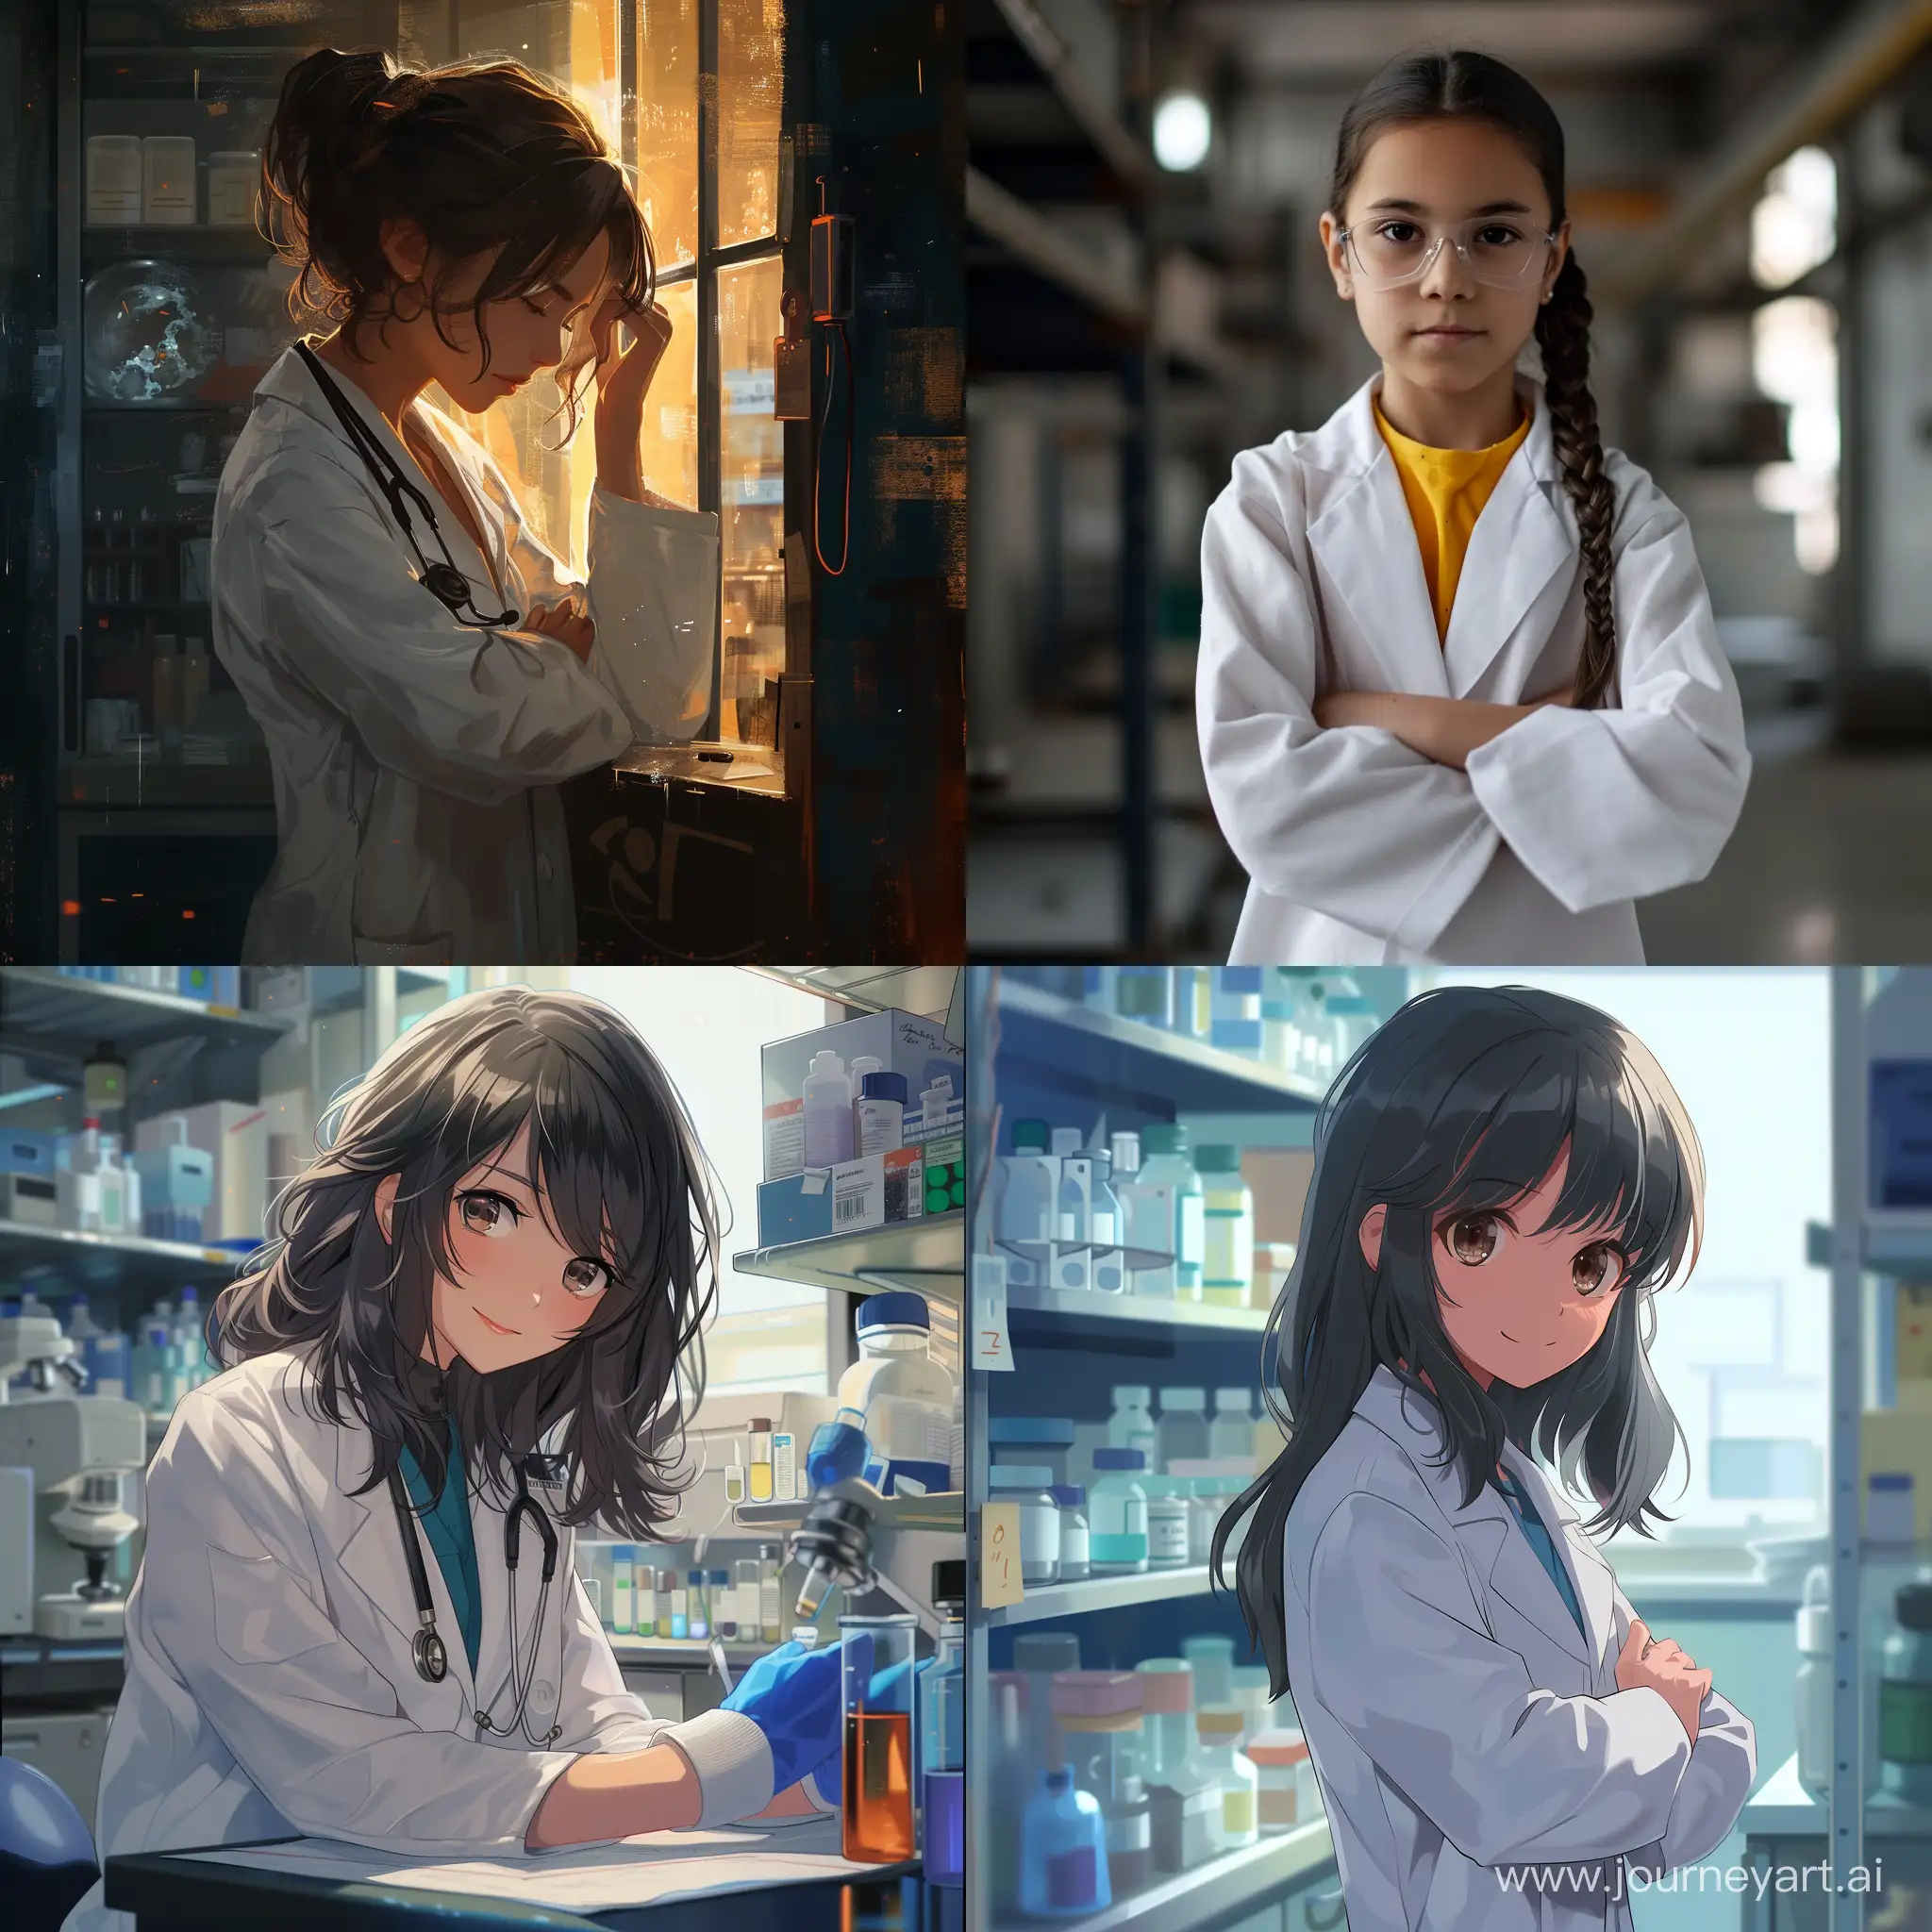 Young-Scientist-Girl-in-Lab-Coat-Experimenting